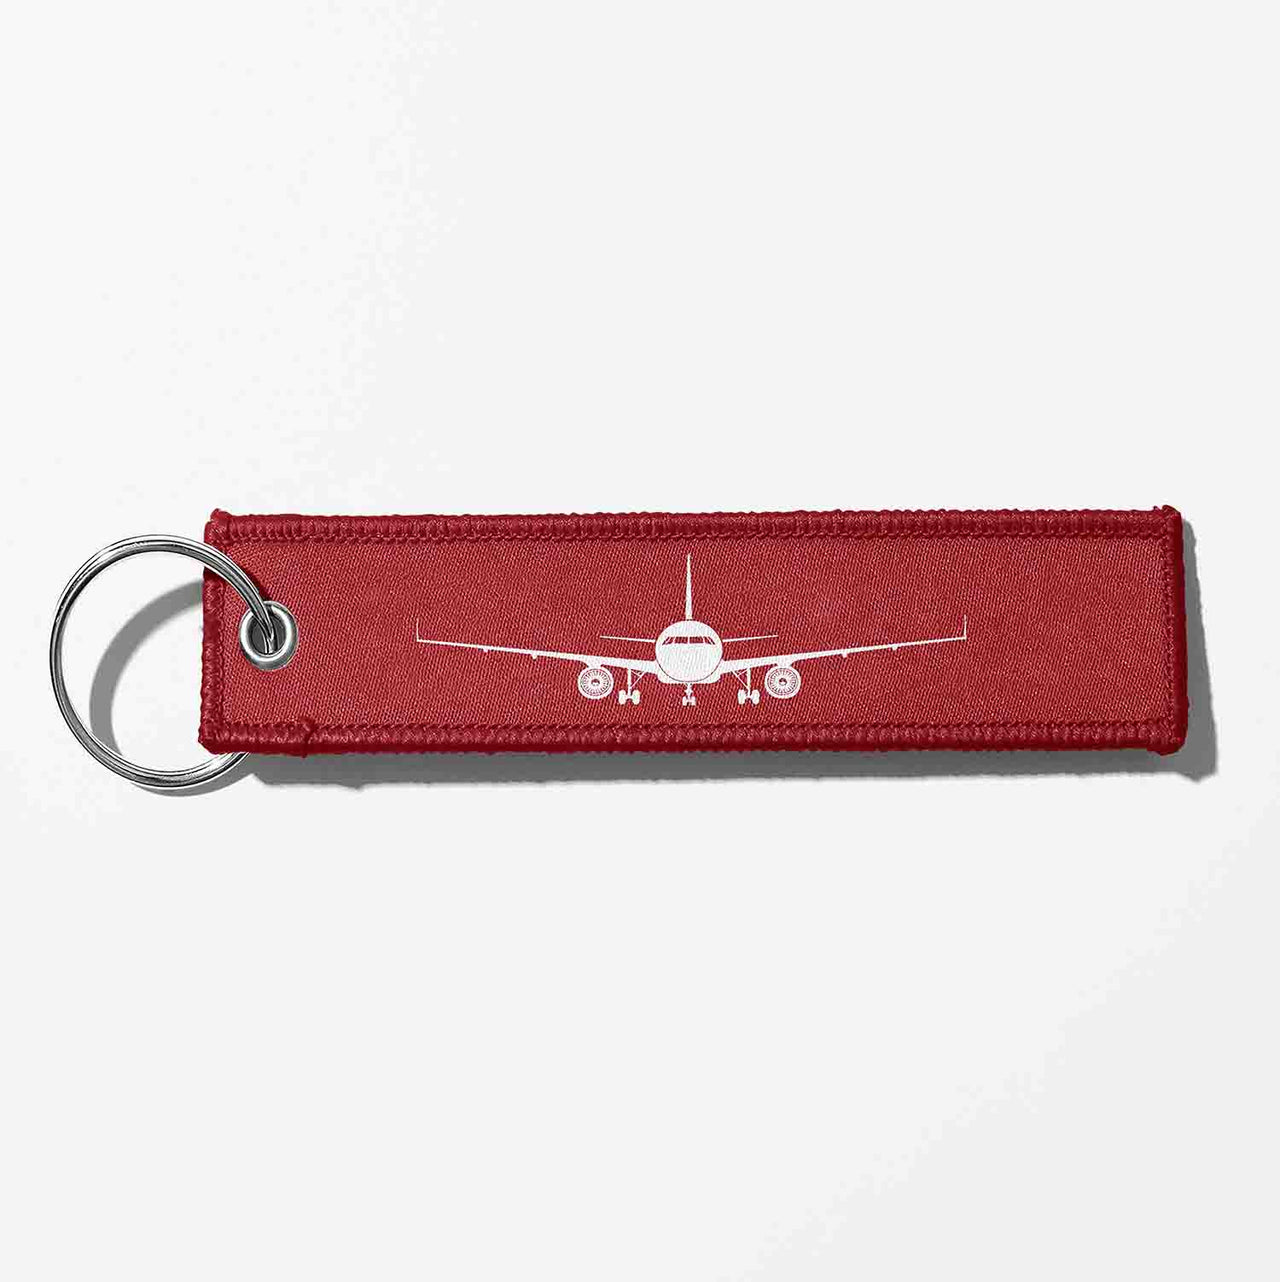 Airbus A320 Silhouette Designed Key Chains